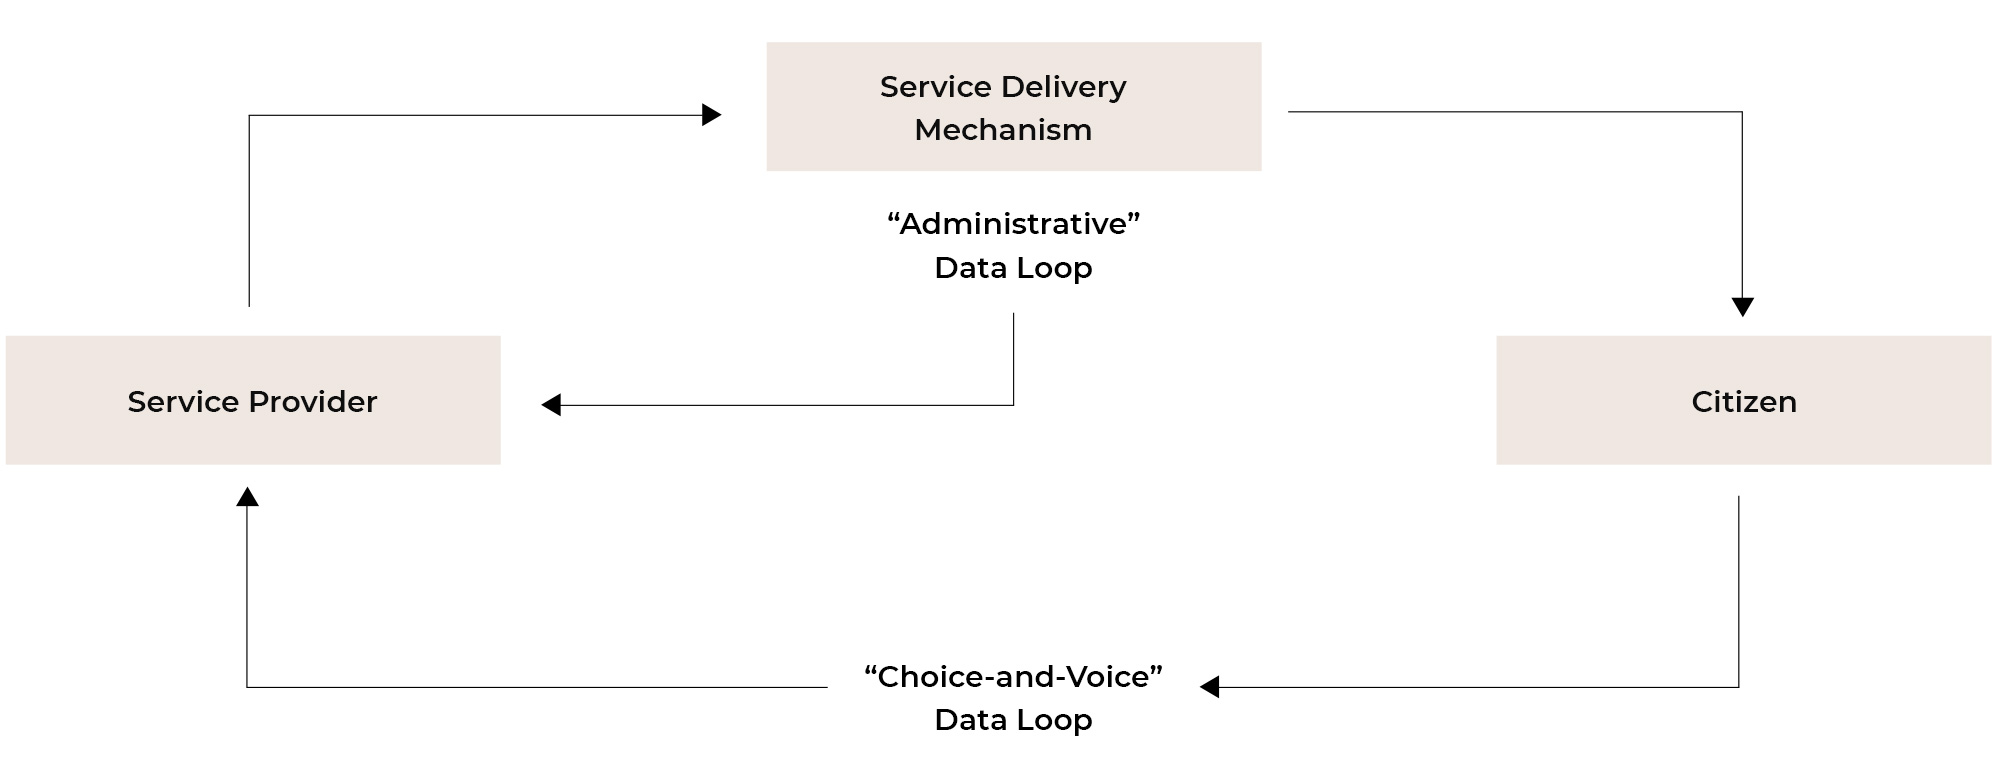 Service Delivery Mechanism